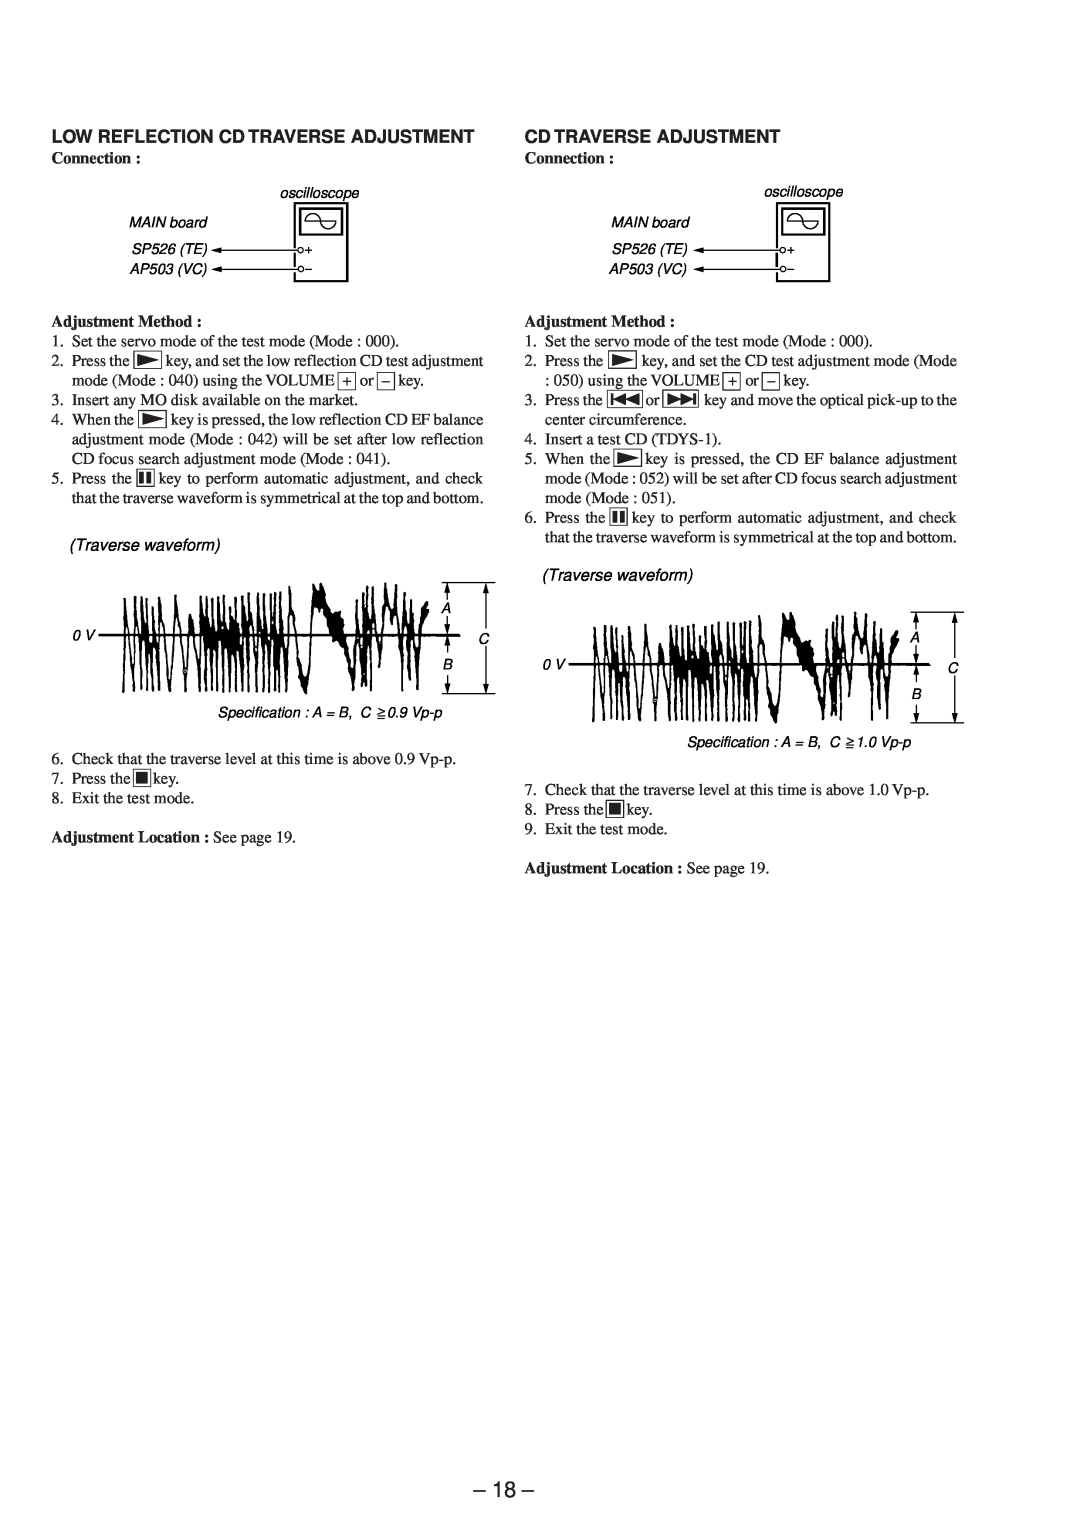 Sony MZ-R37 specifications 18, Low Reflection Cd Traverse Adjustment, Connection, Traverse waveform 